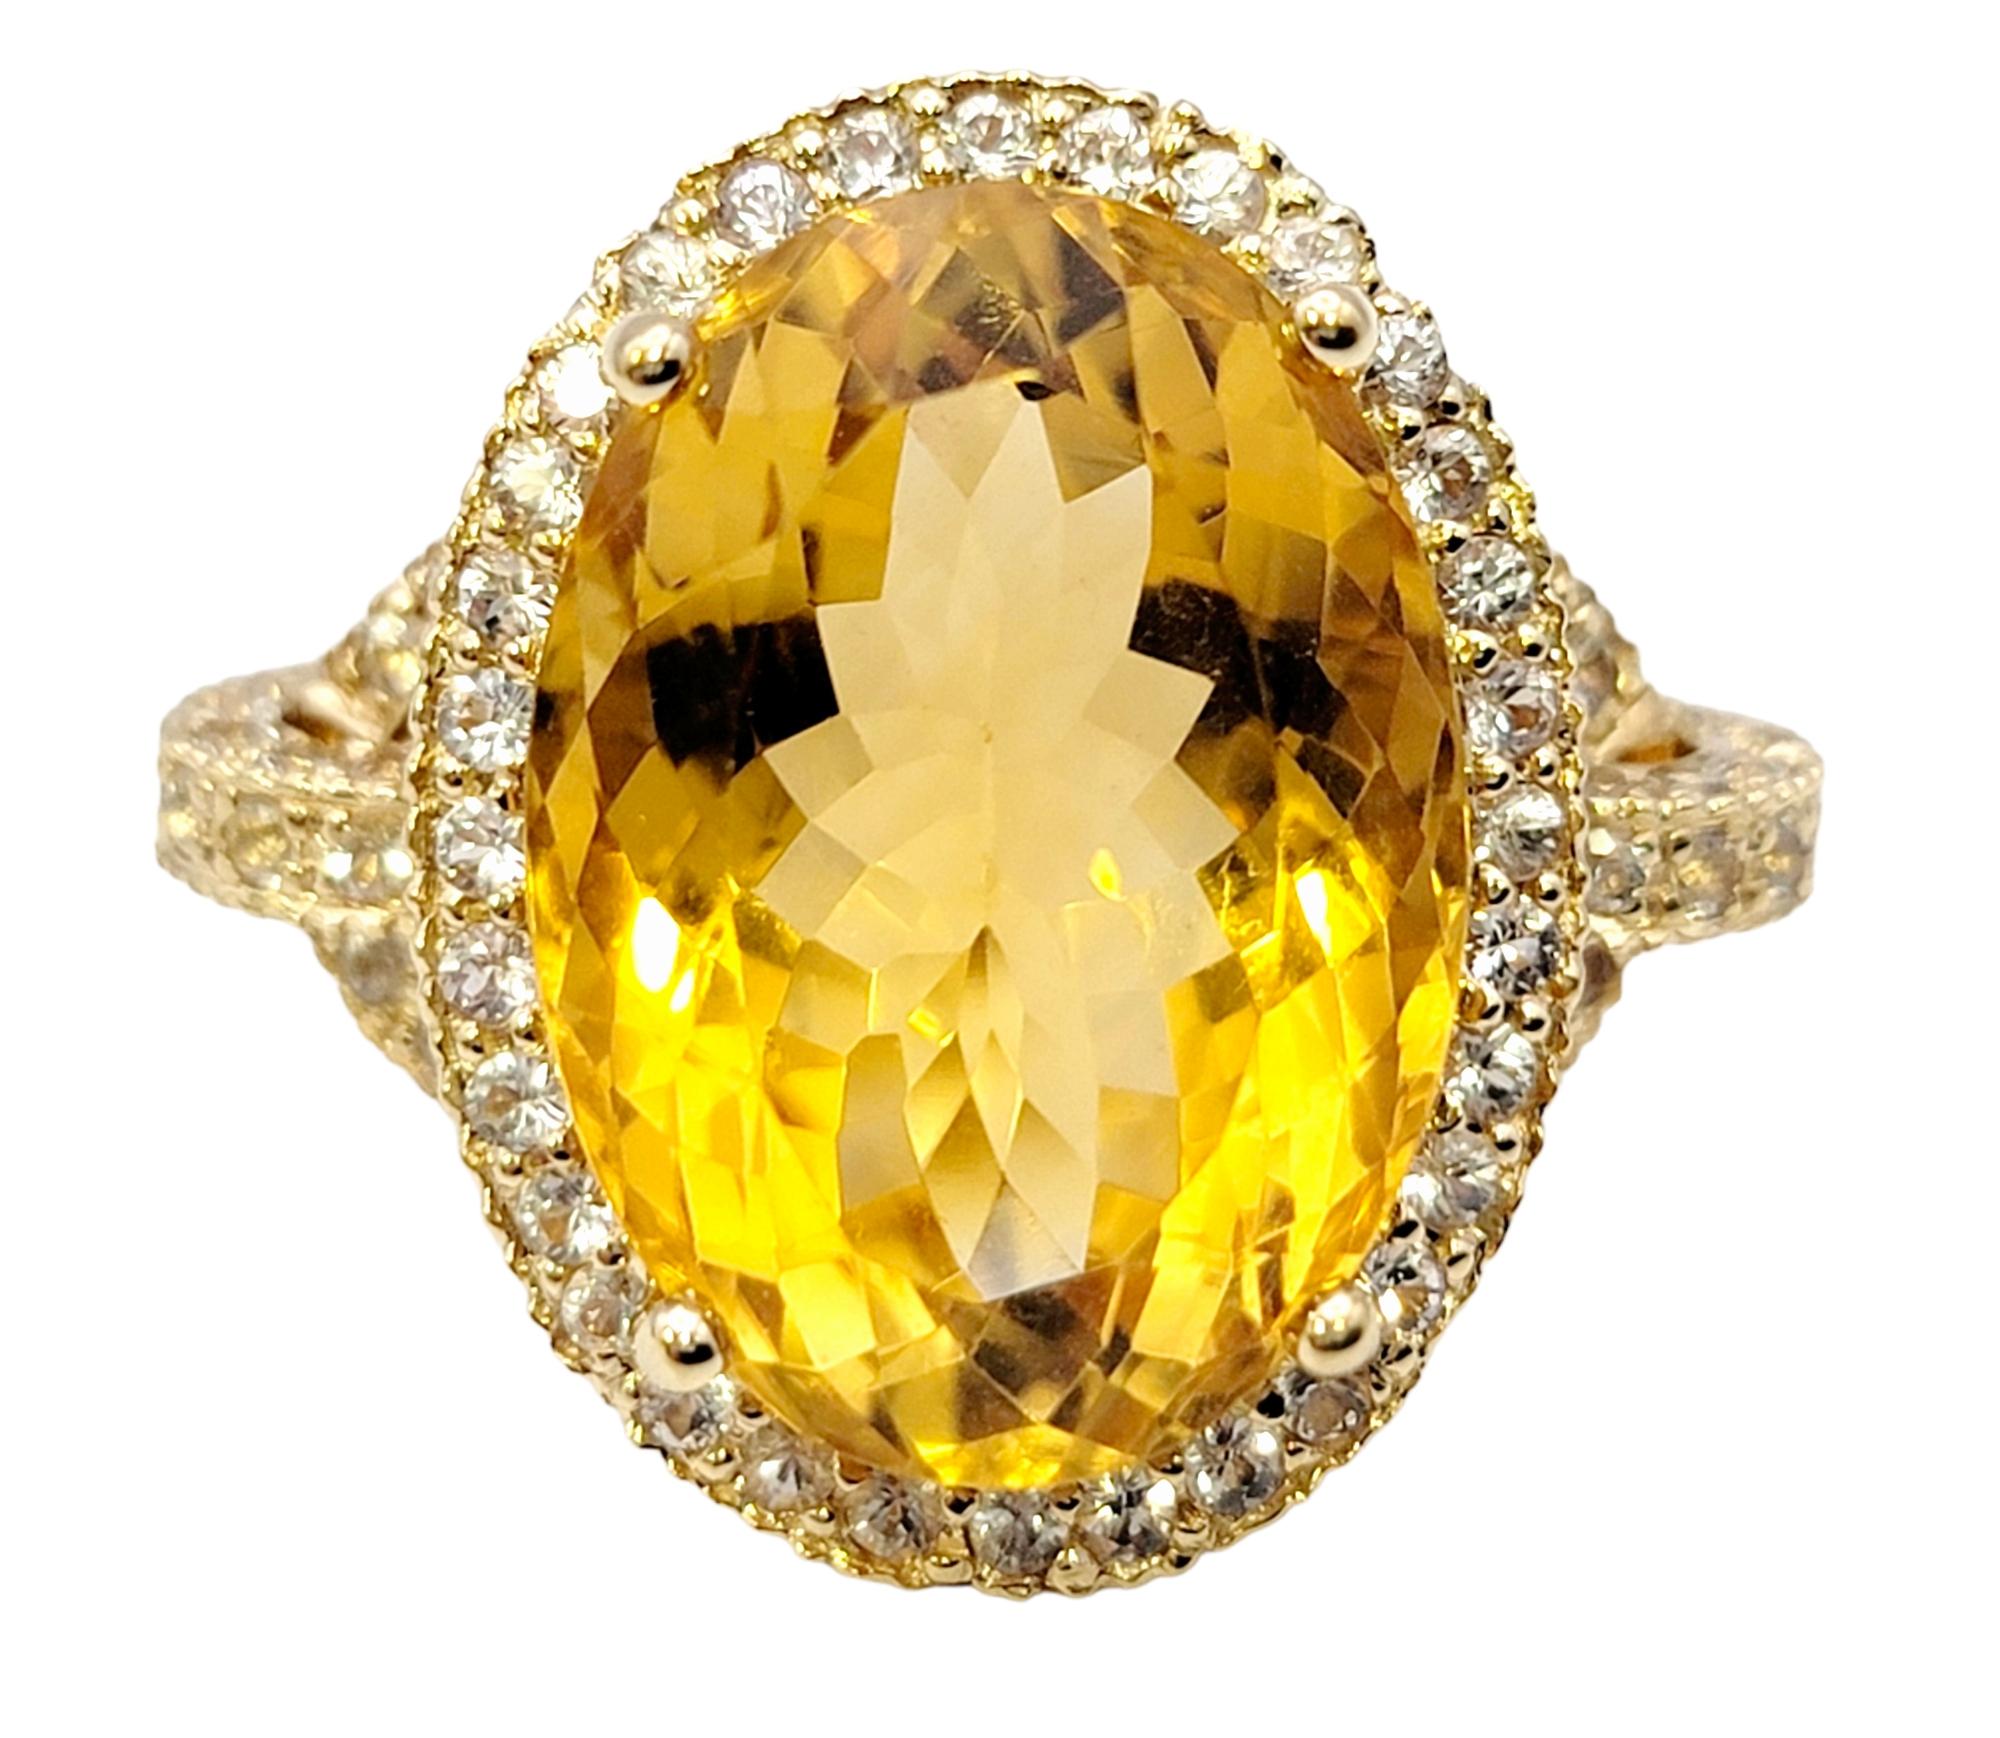 Ring size: 6

Absolutely gorgeous citrine and white sapphire halo cocktail ring. The striking orangish-yellow oval cut center stone is paired with a wide glittering halo of natural pave white sapphires, allowing this bold and beautiful piece to